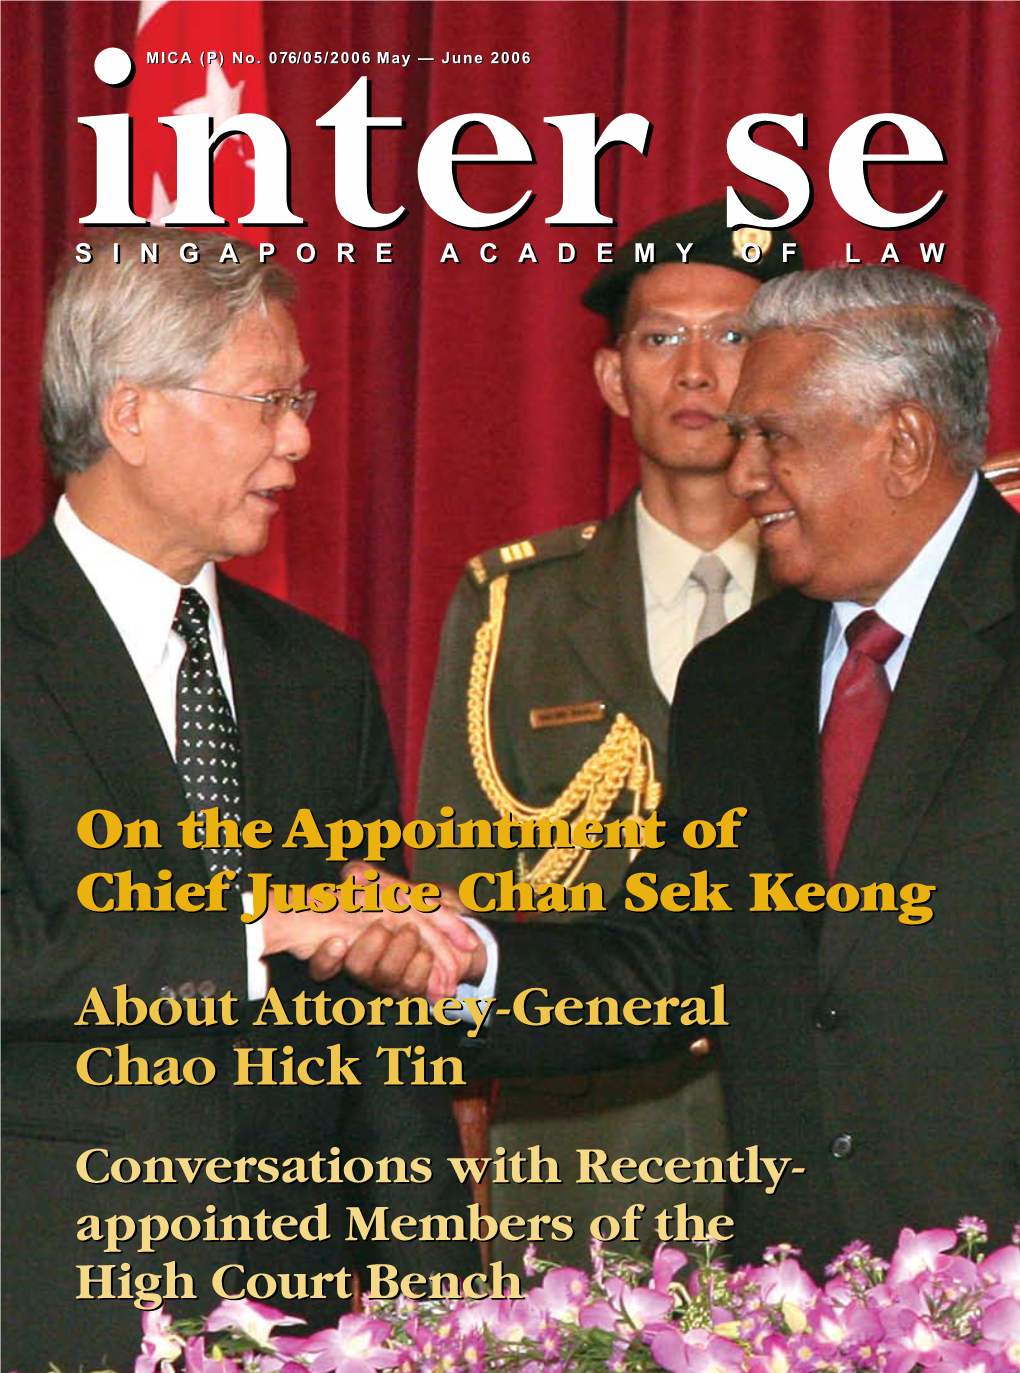 On the Appointment of Chief Justice Chan Sek Keong